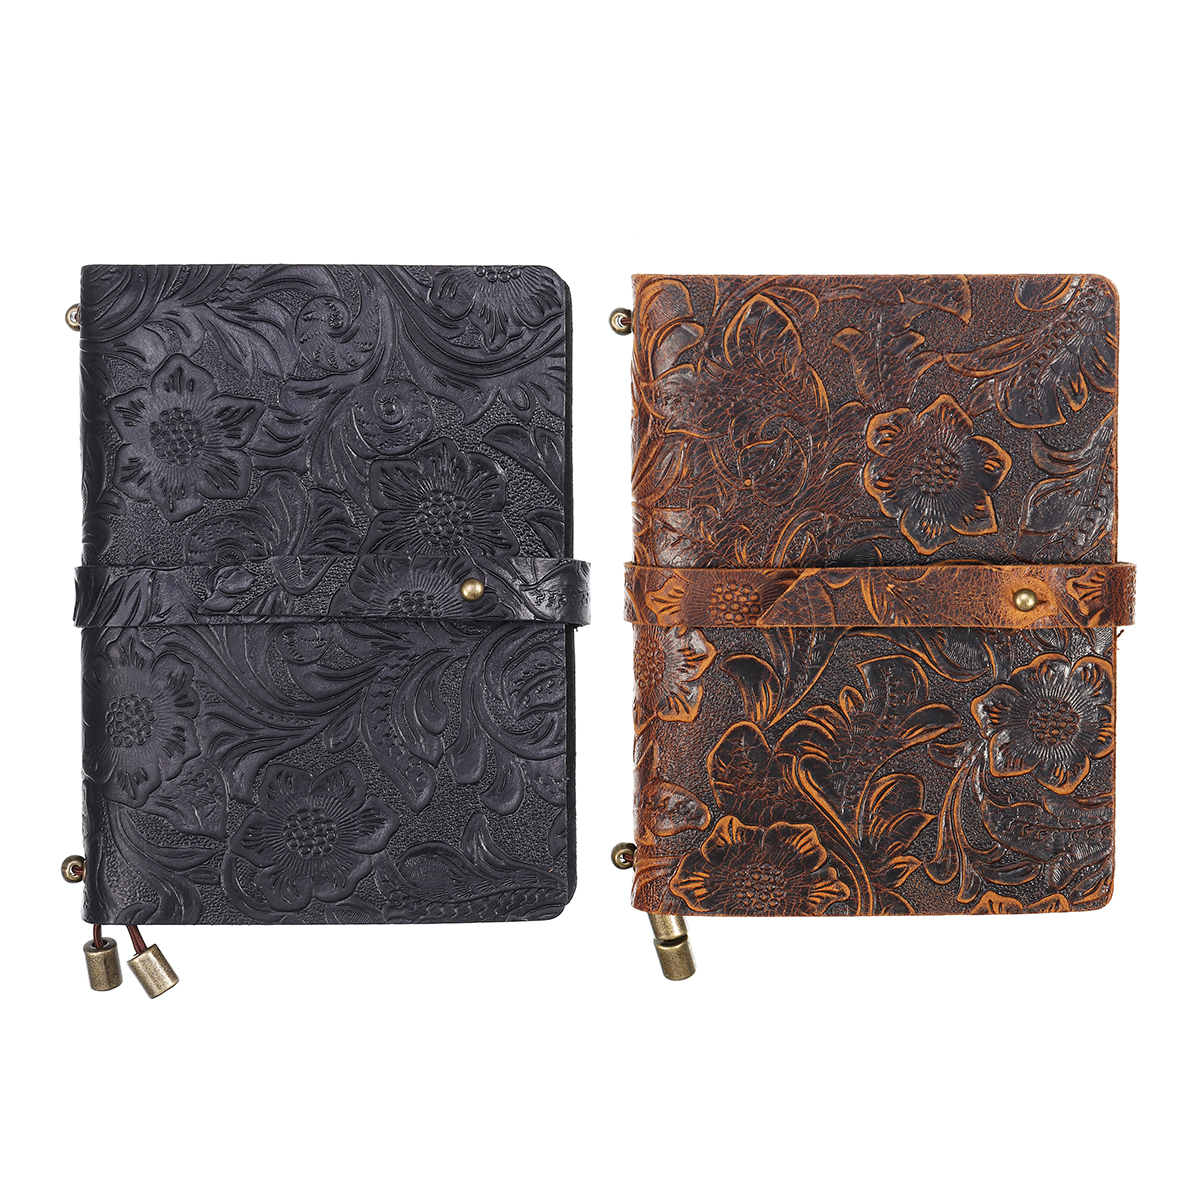 

India Handmade Notebook Medium Embossed Stitched Leather Diary Notebook Journal For School Office Supplies